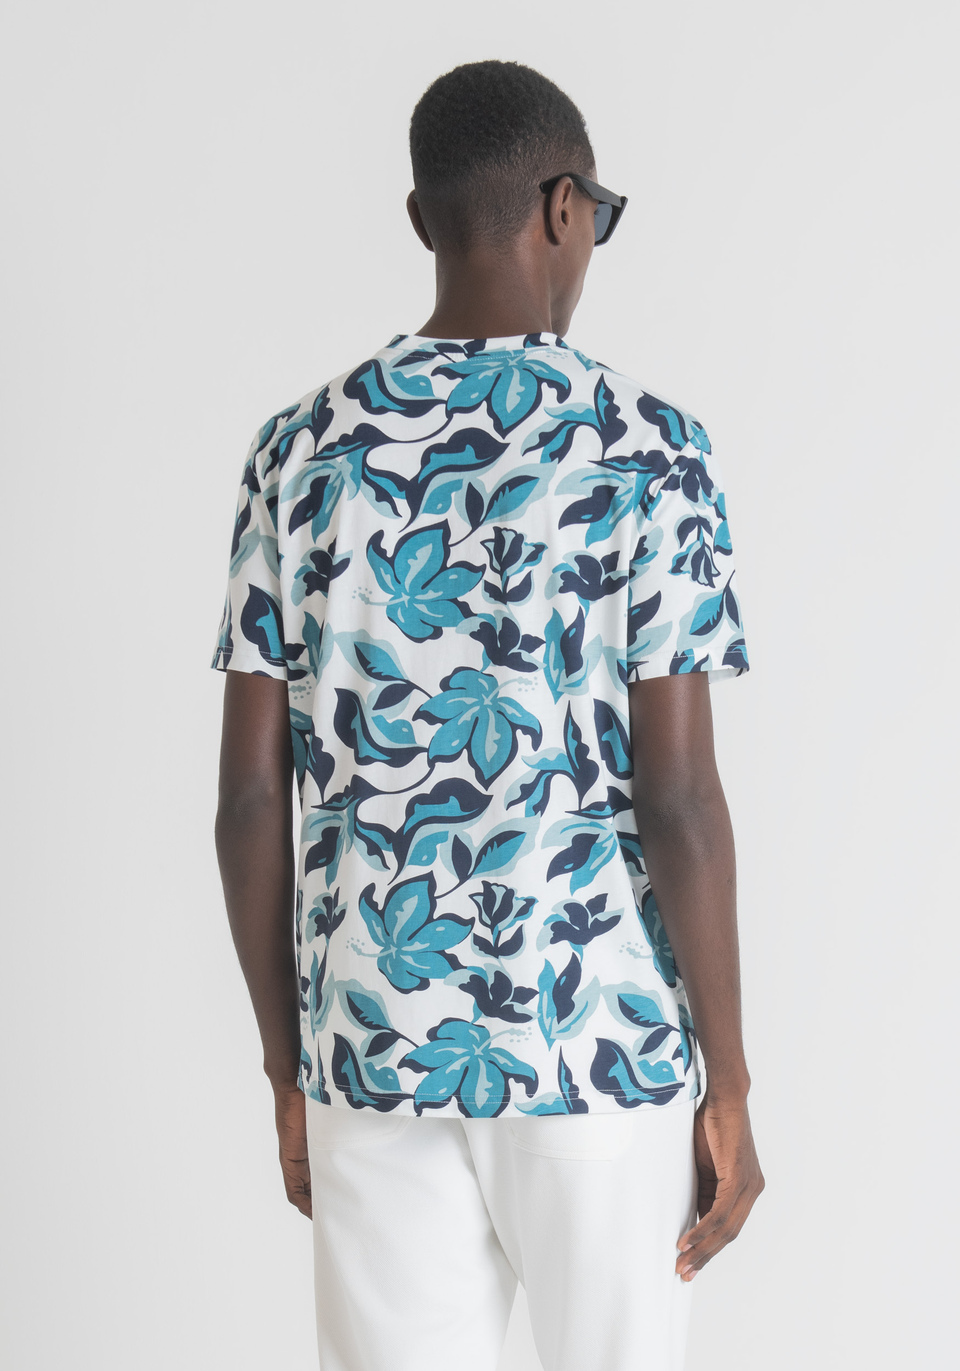 REGULAR-FIT T-SHIRT IN PURE COTTON WITH ALL-OVER FLORAL PRINT - Antony Morato Online Shop